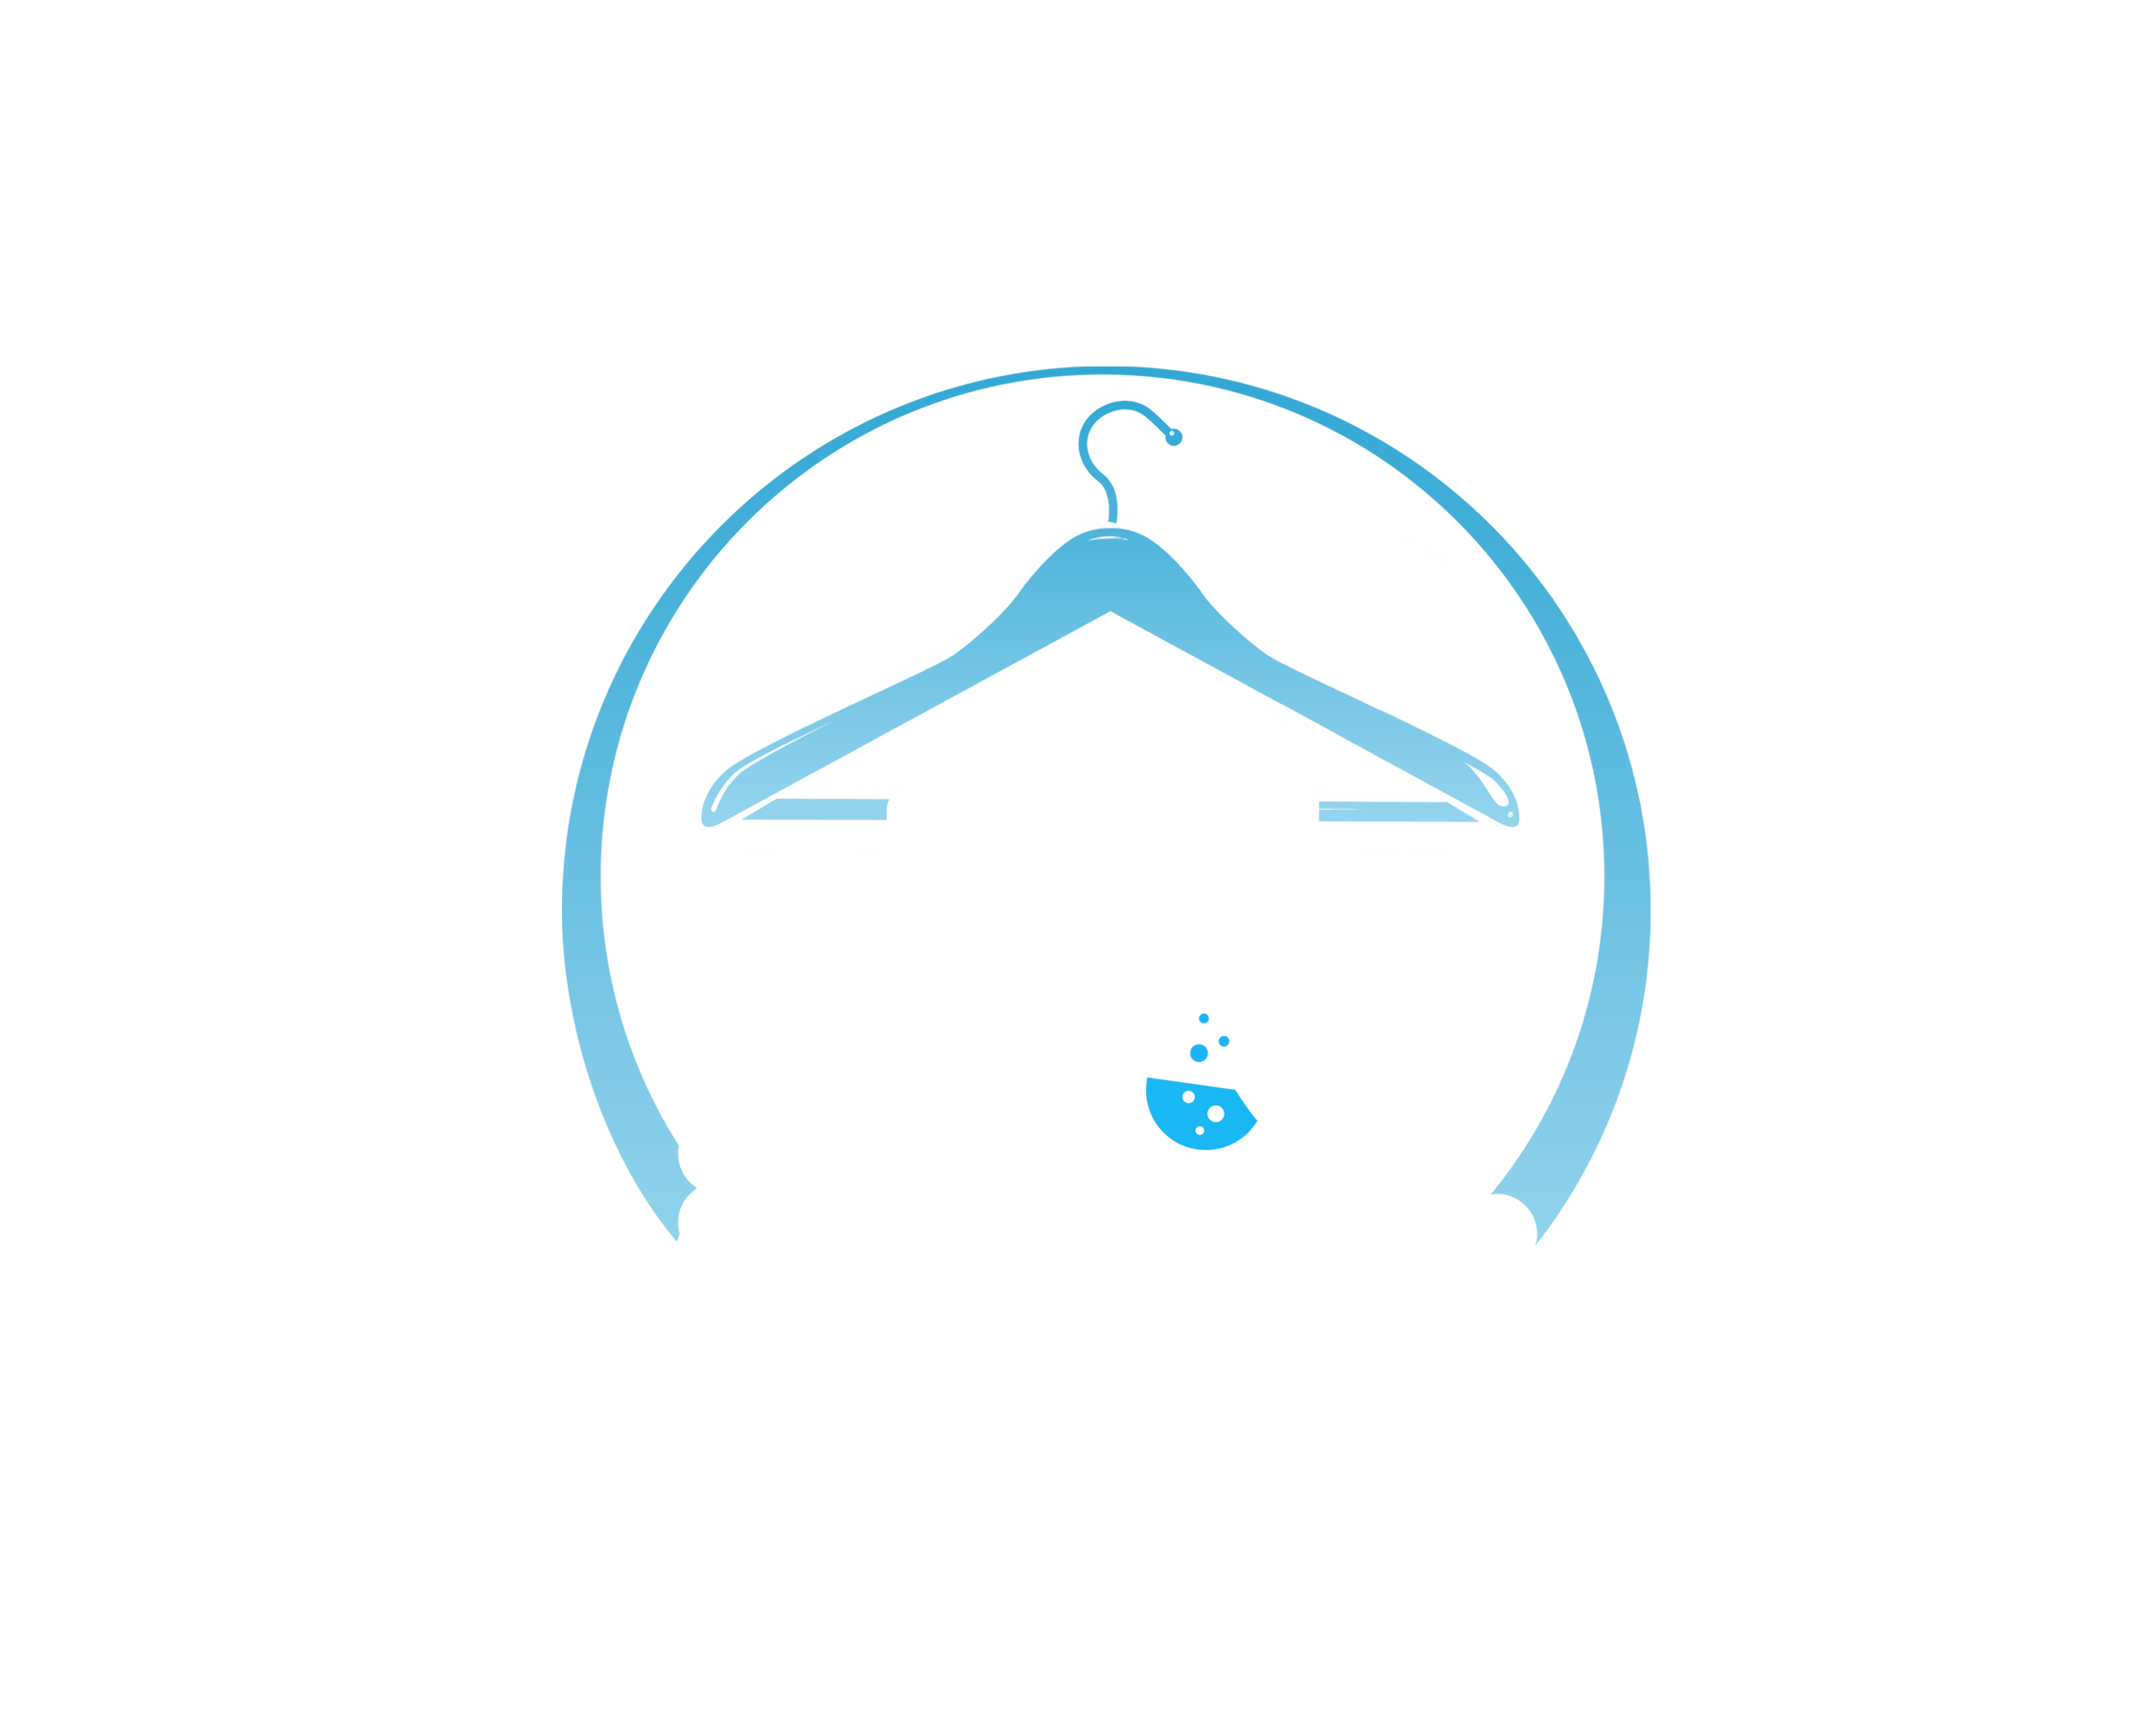 Pure Press Dry Cleaners